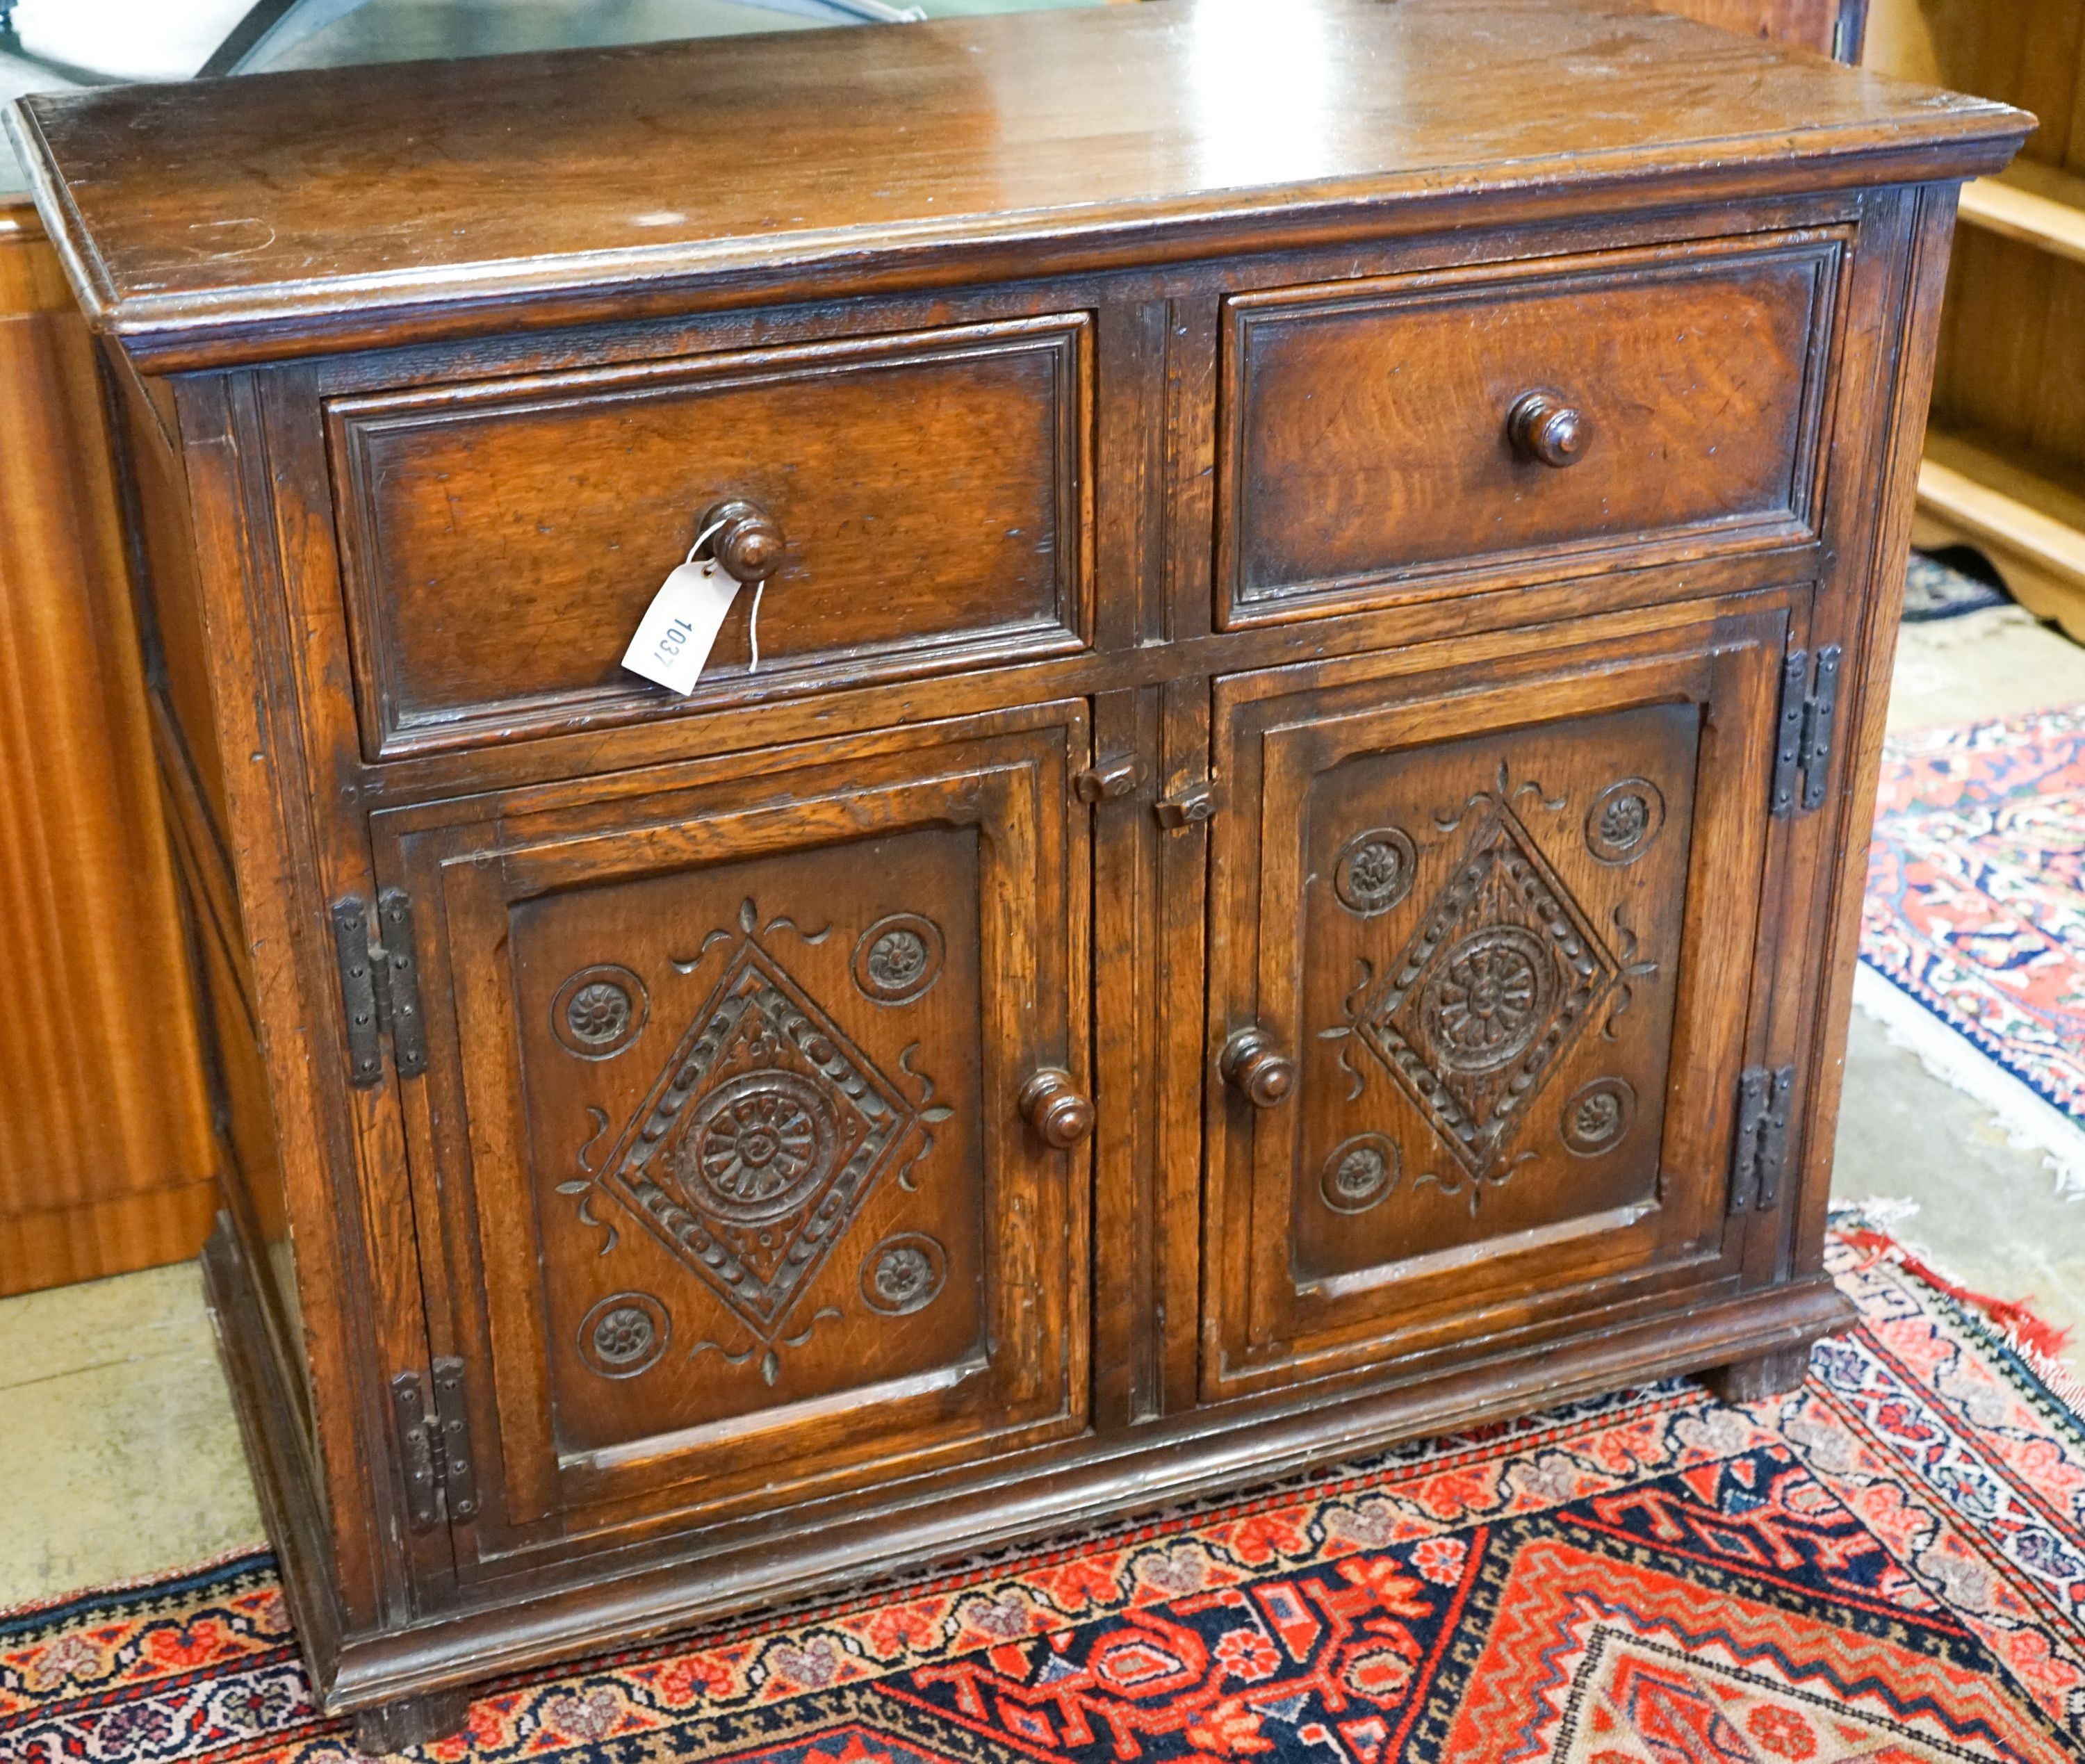 A 17th century style carved and panelled oak cupboard